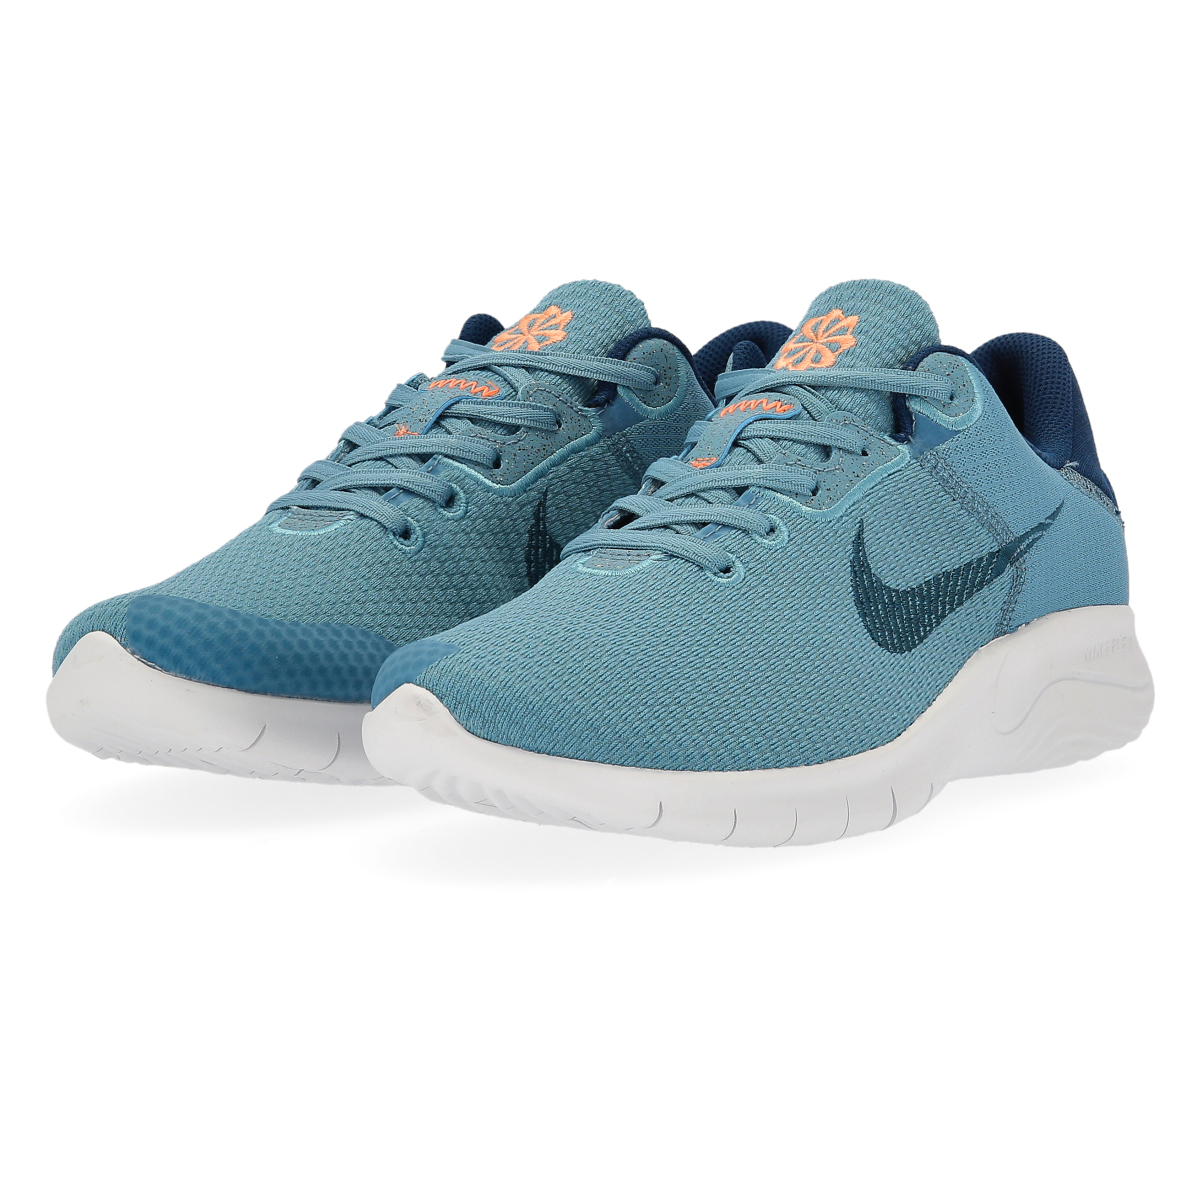 Zapatillas Running Nike Flex Experience Rn 11 Nn Hombre,  image number null